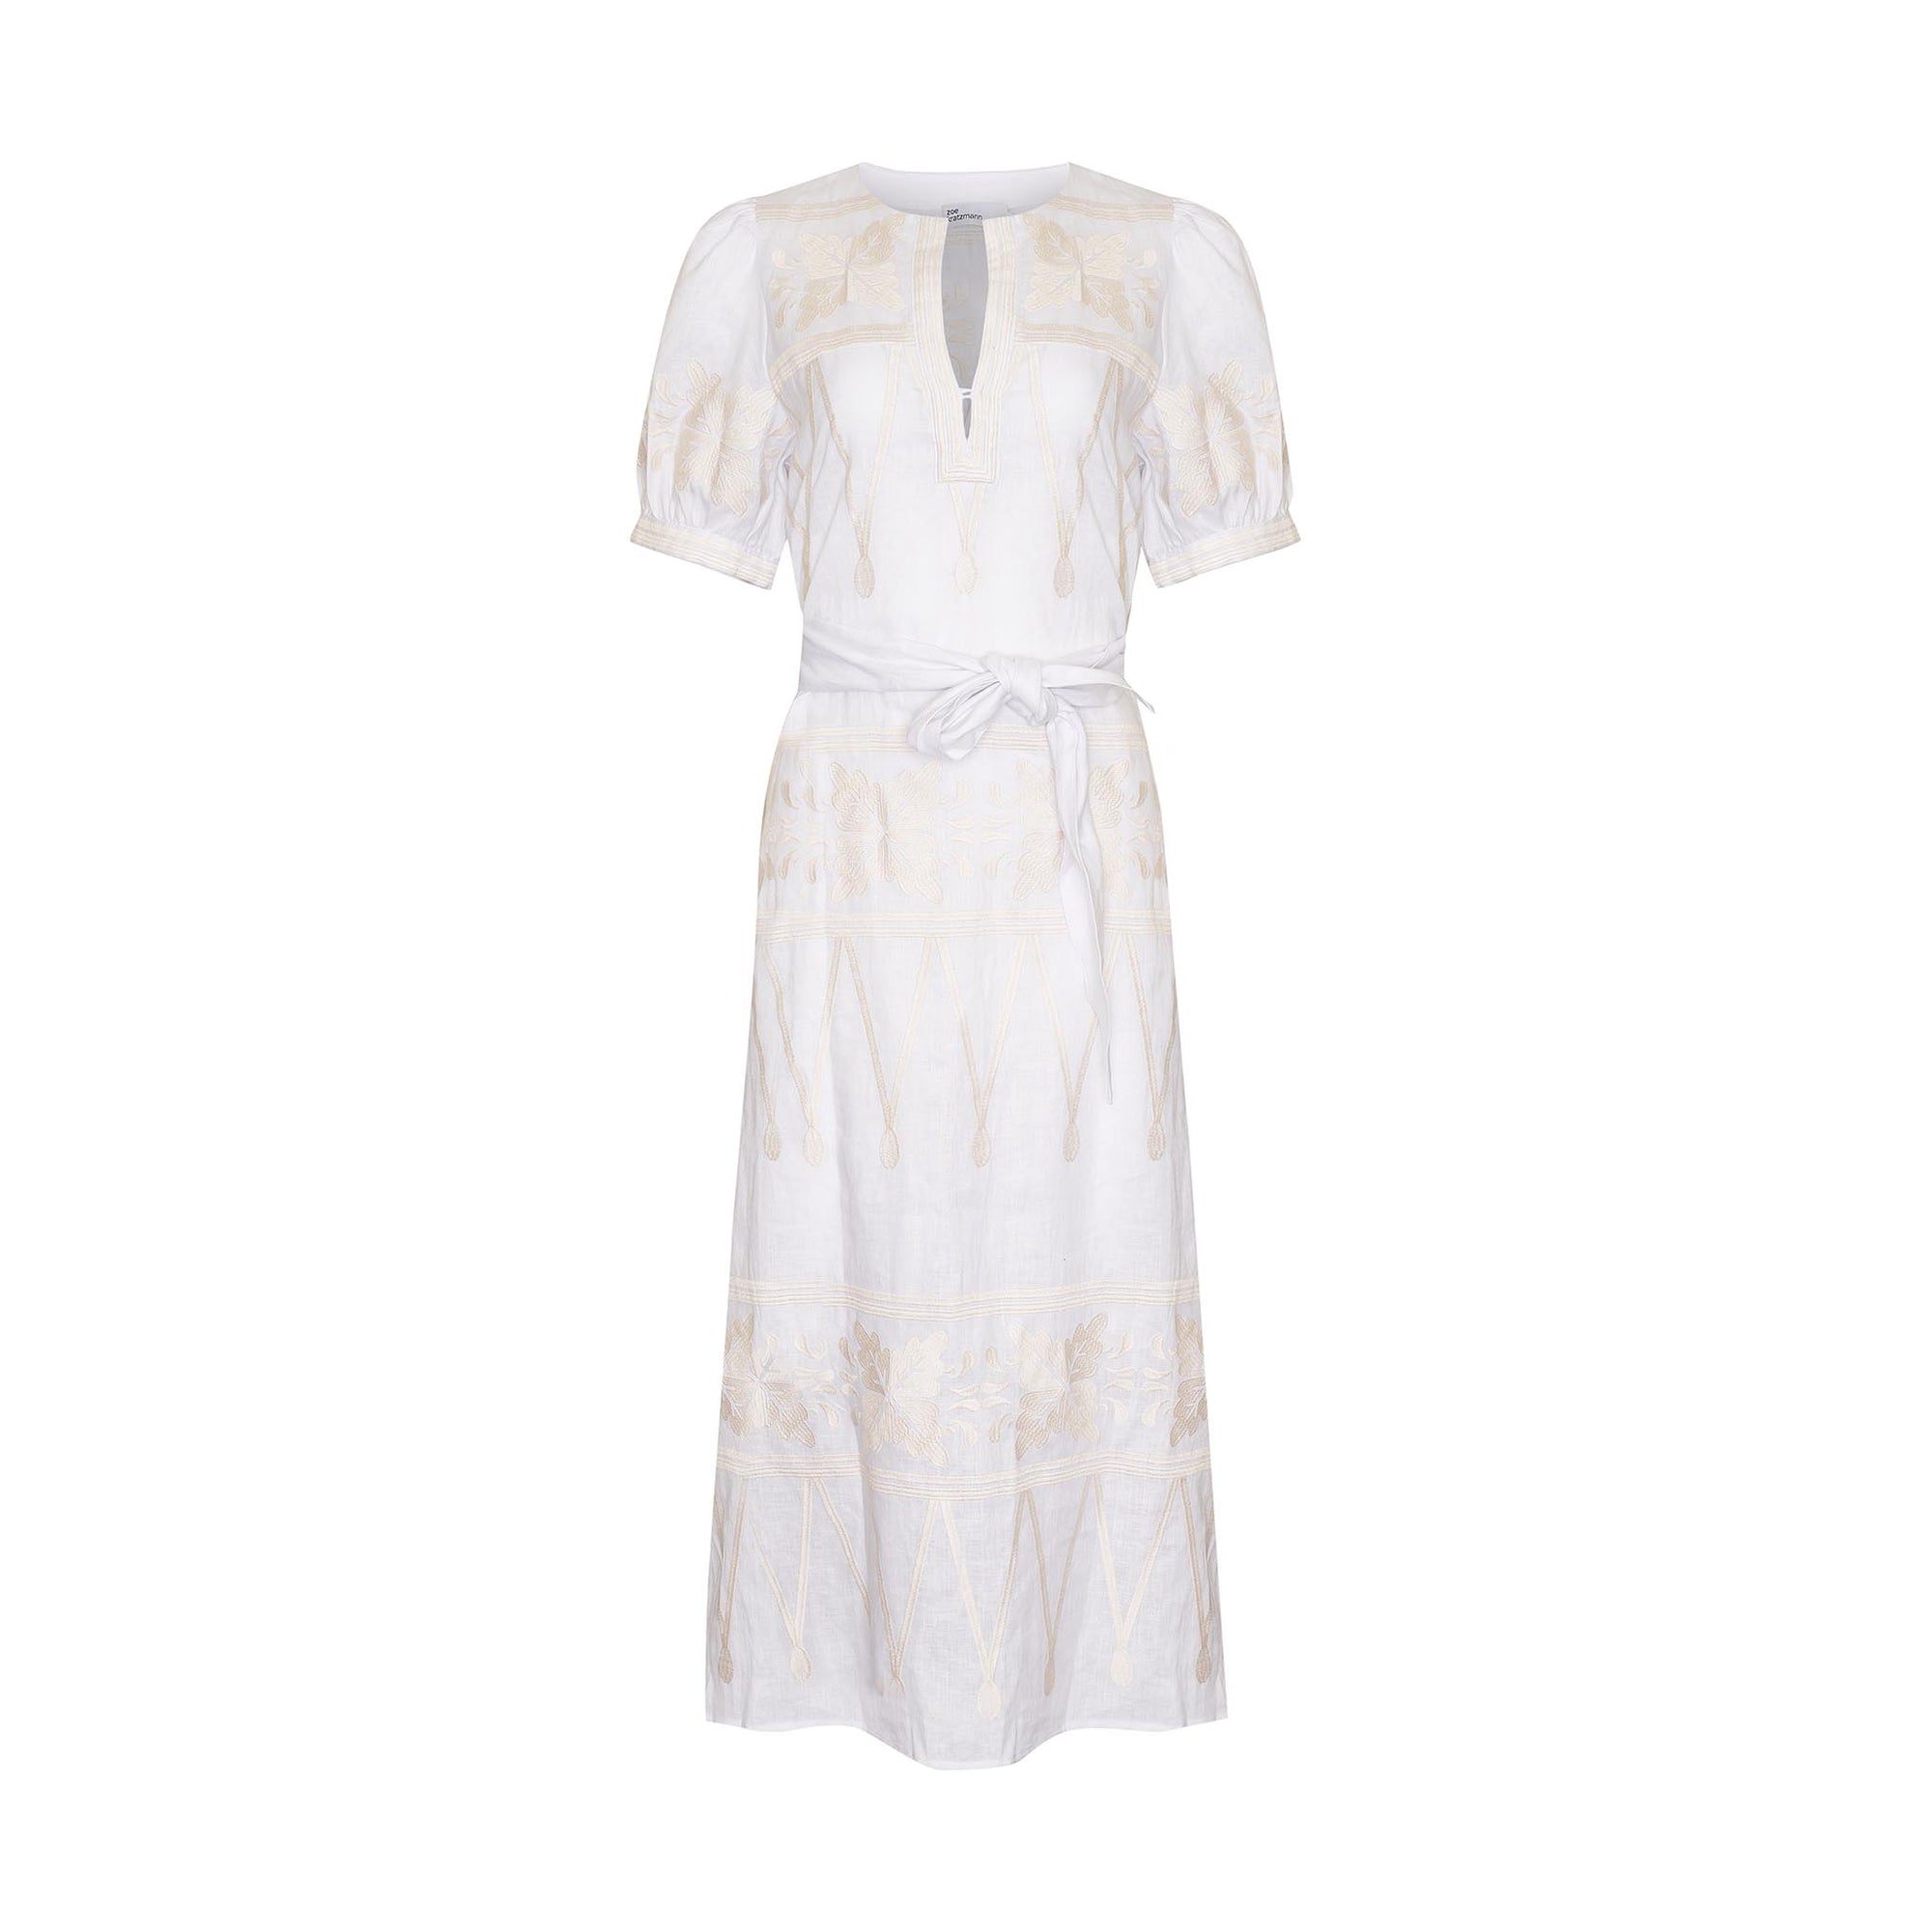 white and cream, midi dress, fabric self tie belt, mid length sleeve, embroidered,  rounded neckline, side splits, side pockets, product image